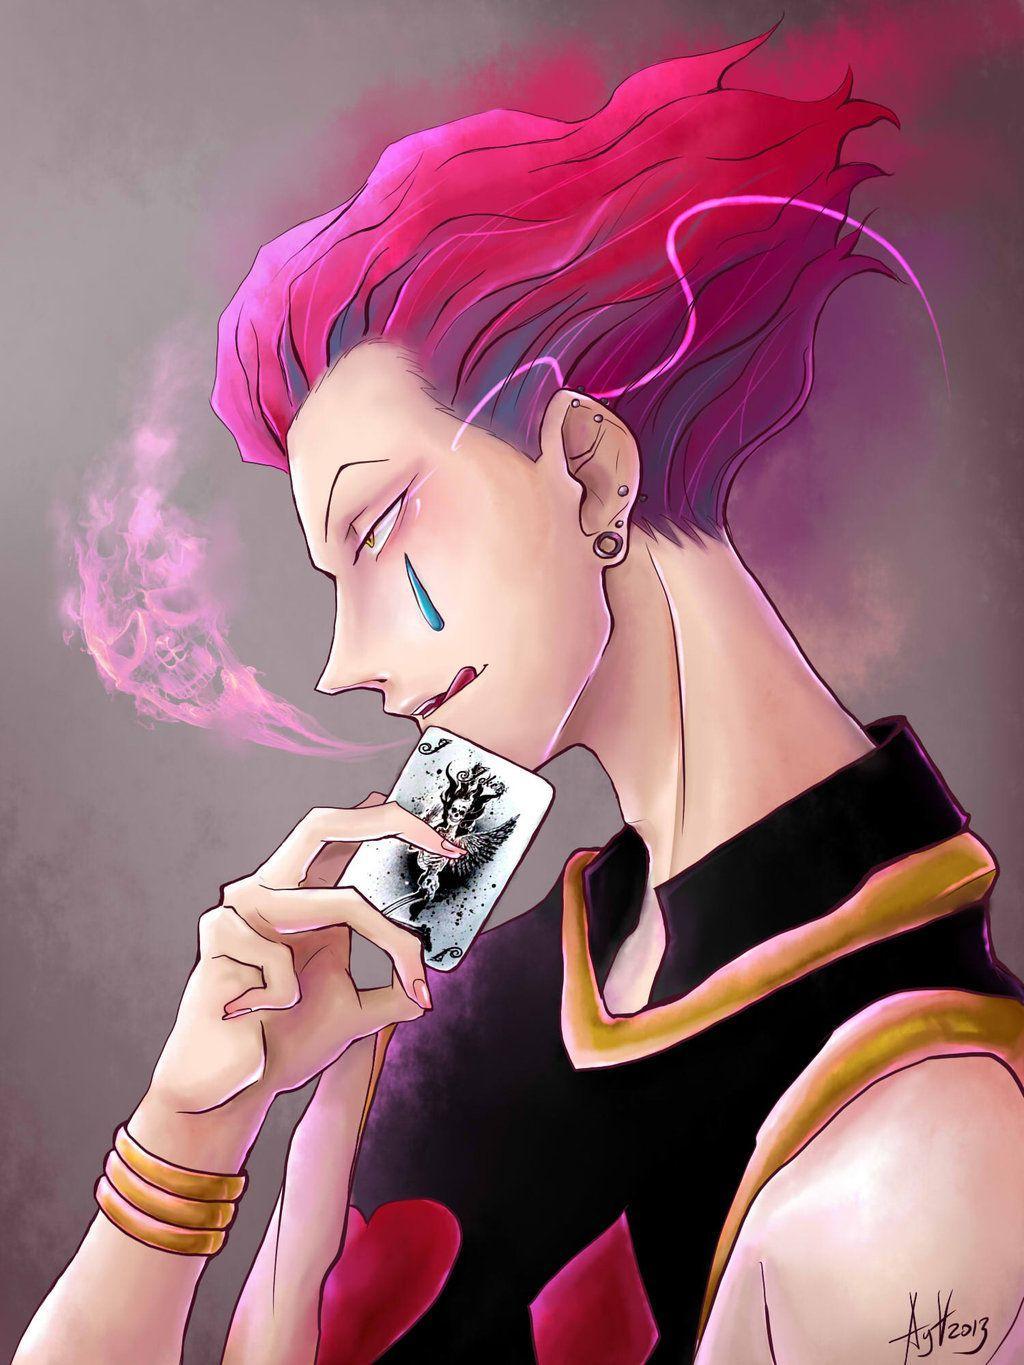 image about Hisoka. Fanart, Search and Hunters